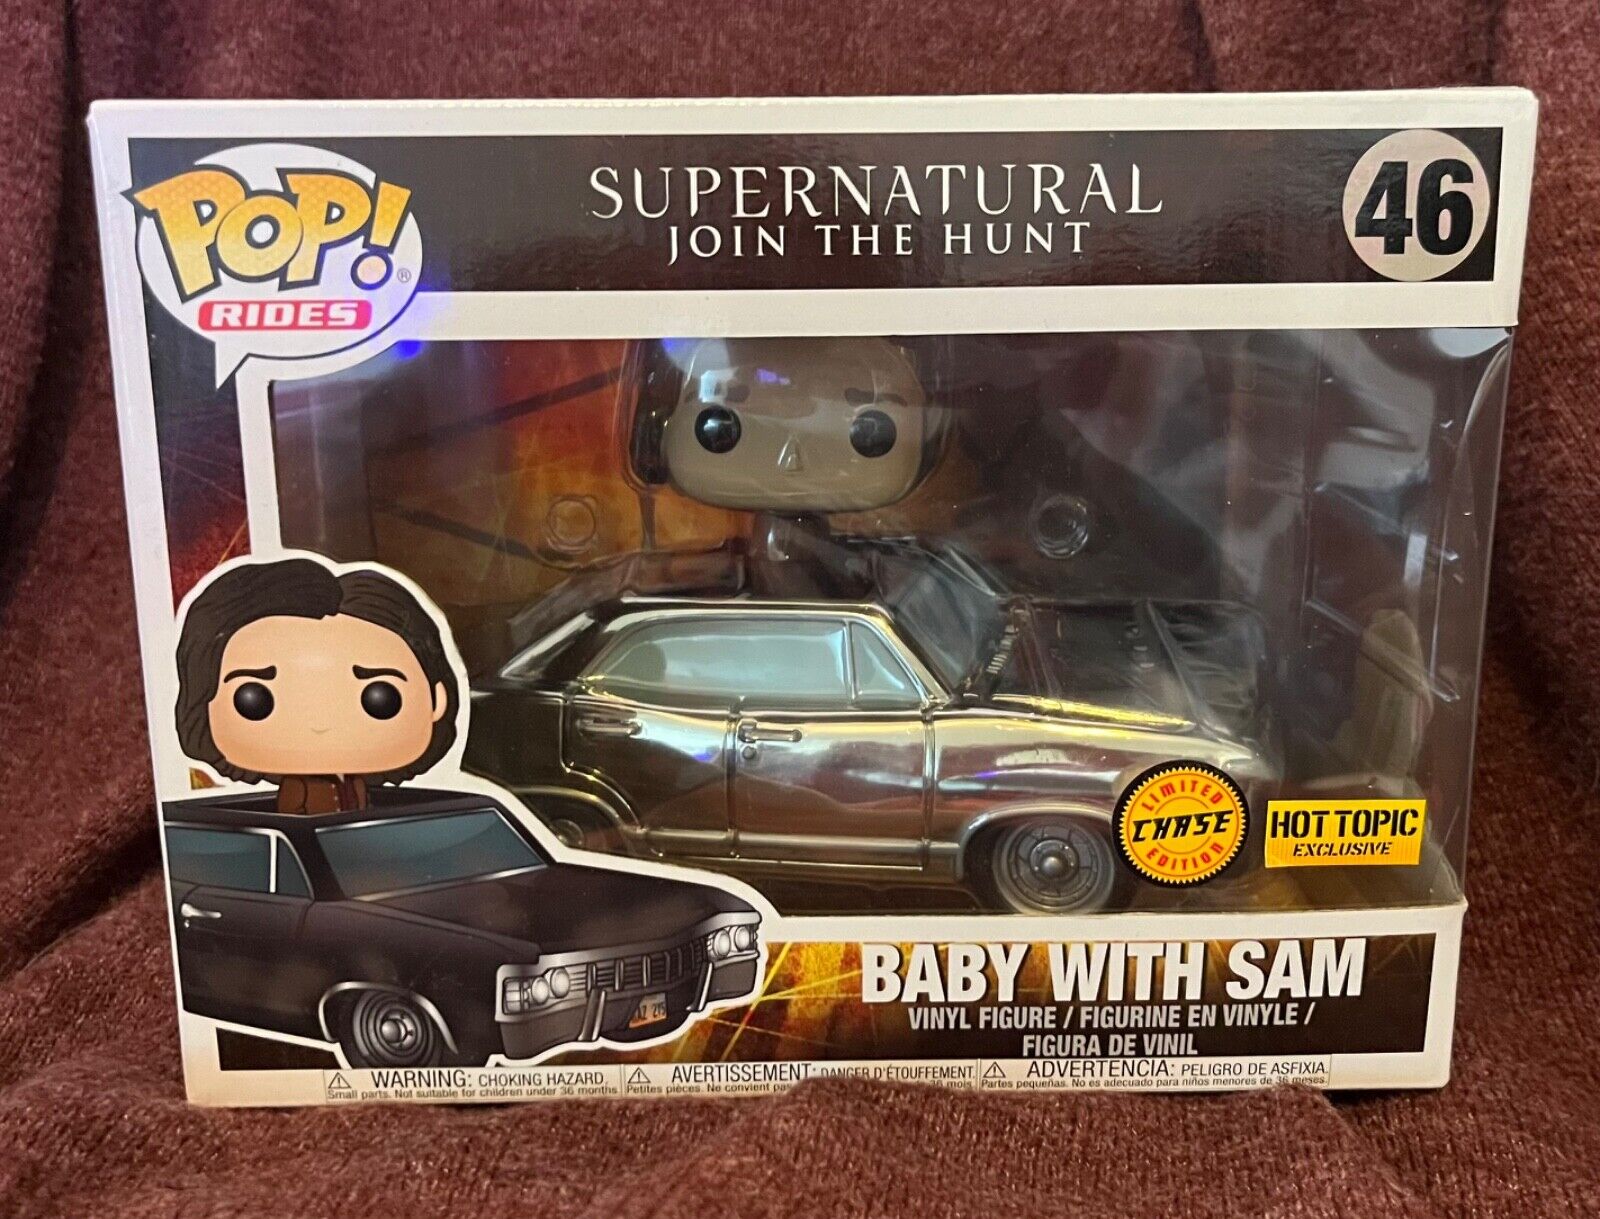 Funko Pop Rides Supernatural Sam Baby Chase Hot Topic Exclusive 67 Chevy Impala